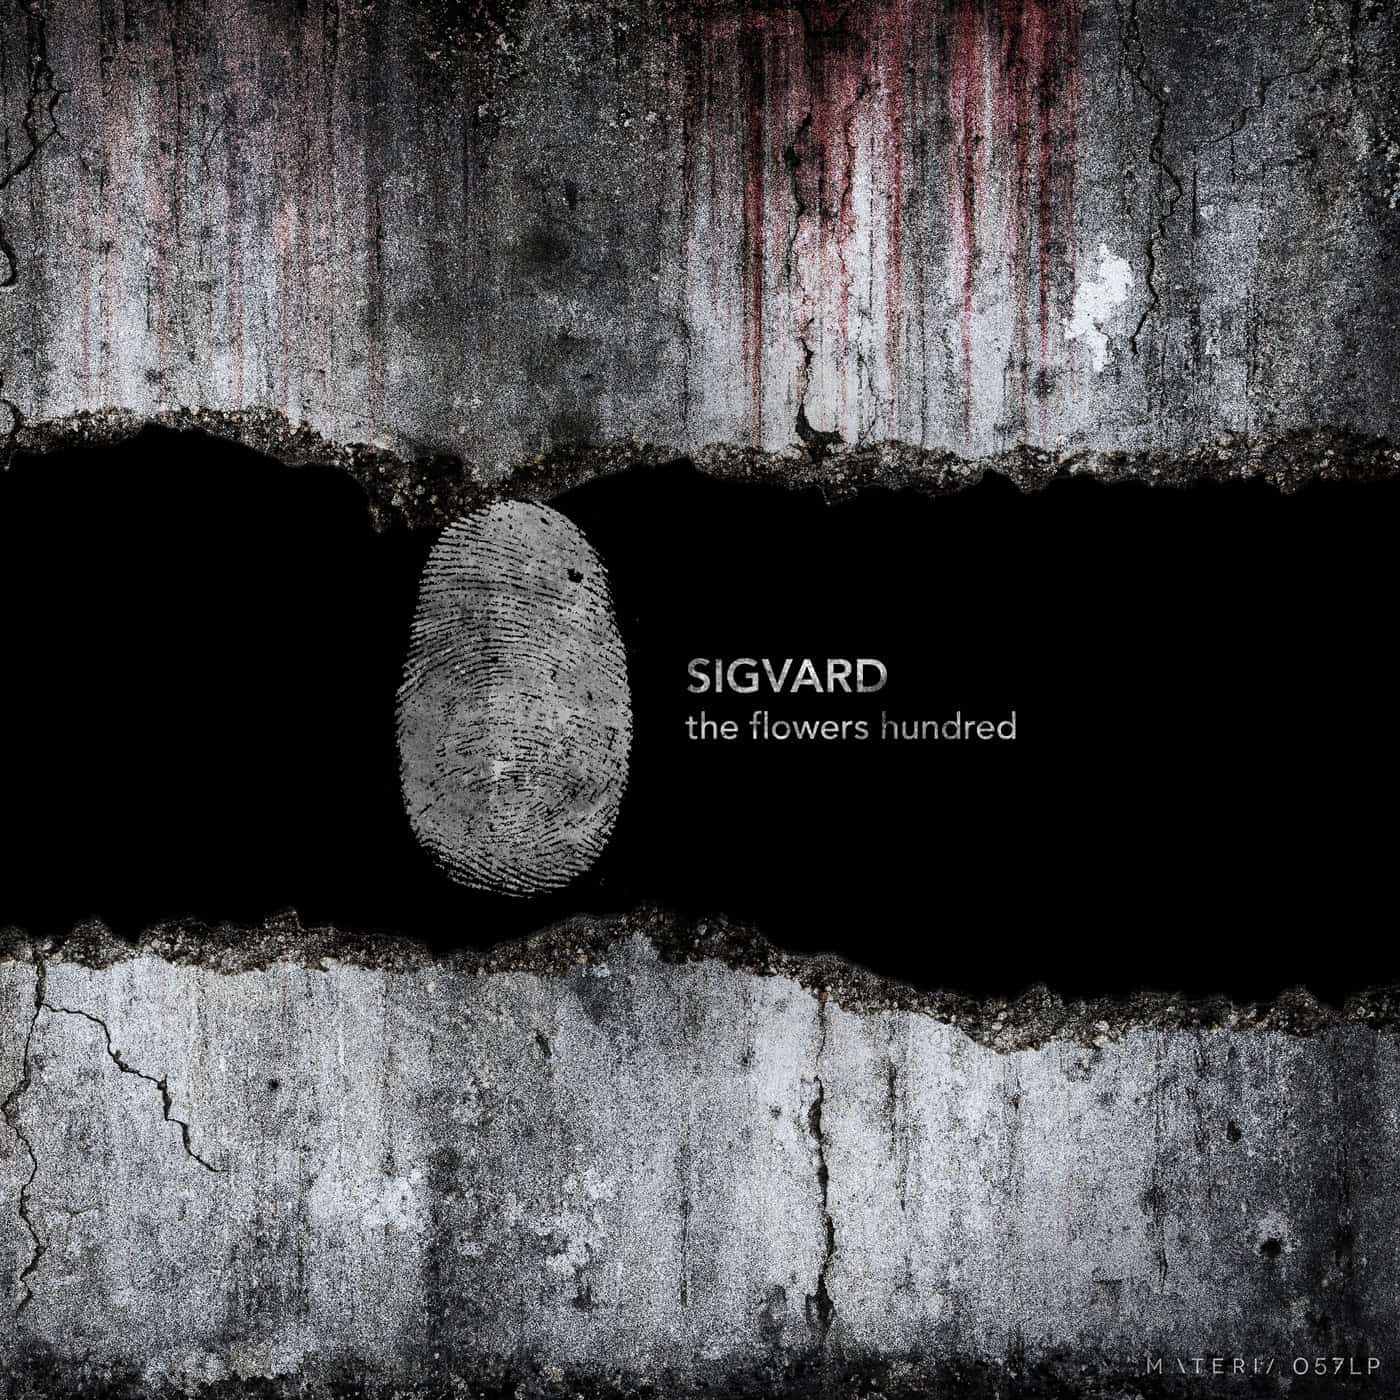 image cover: Sigvard - The Flowers Hundred LP / MATERIA057